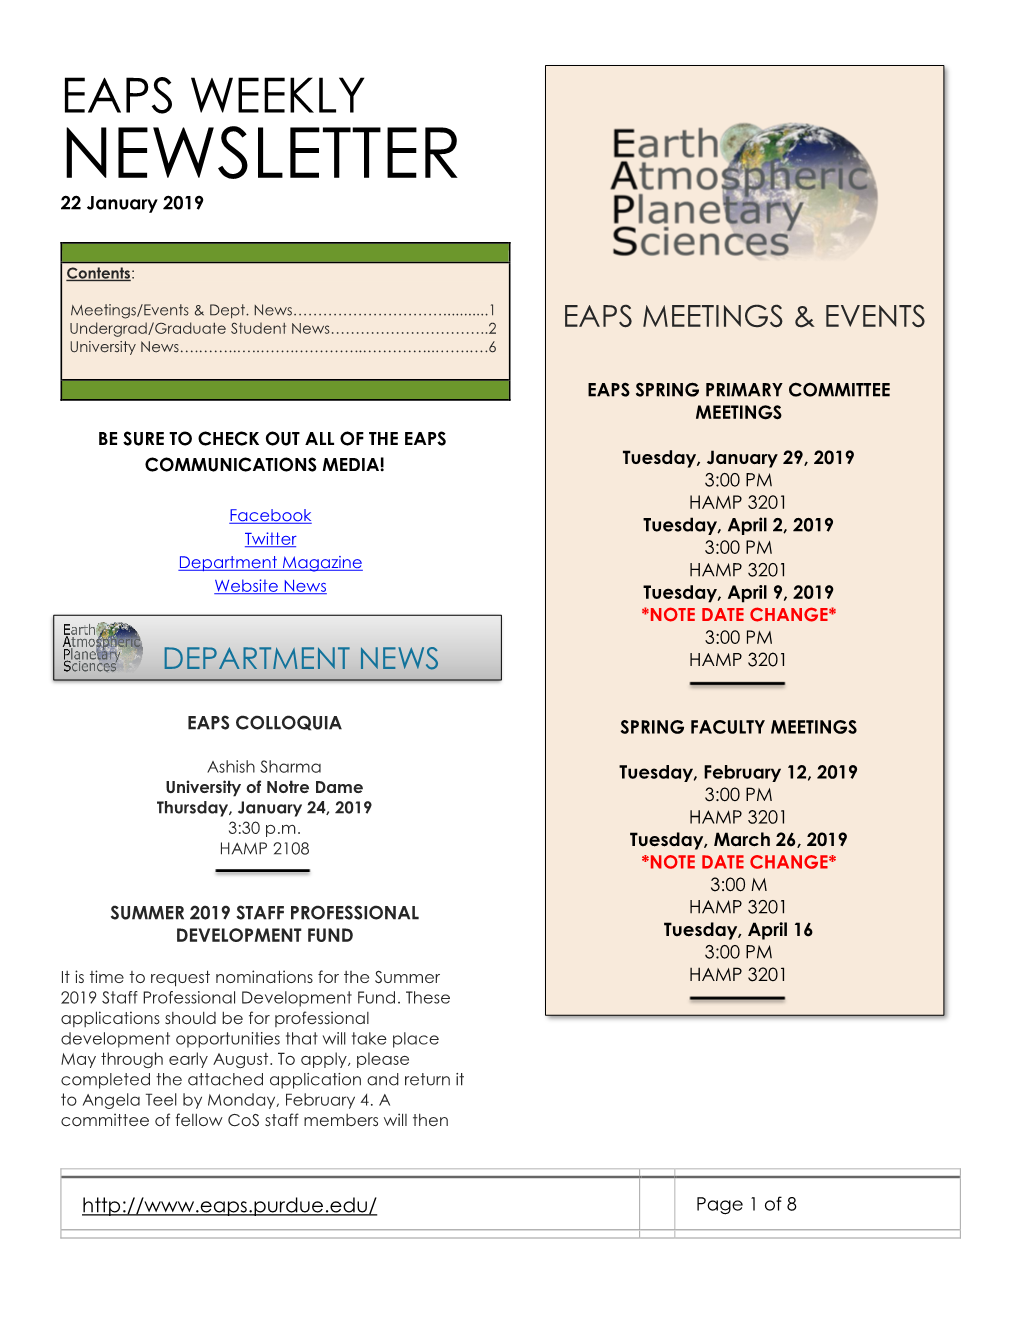 EAPS Weekly Newsletter: January 22, 2019